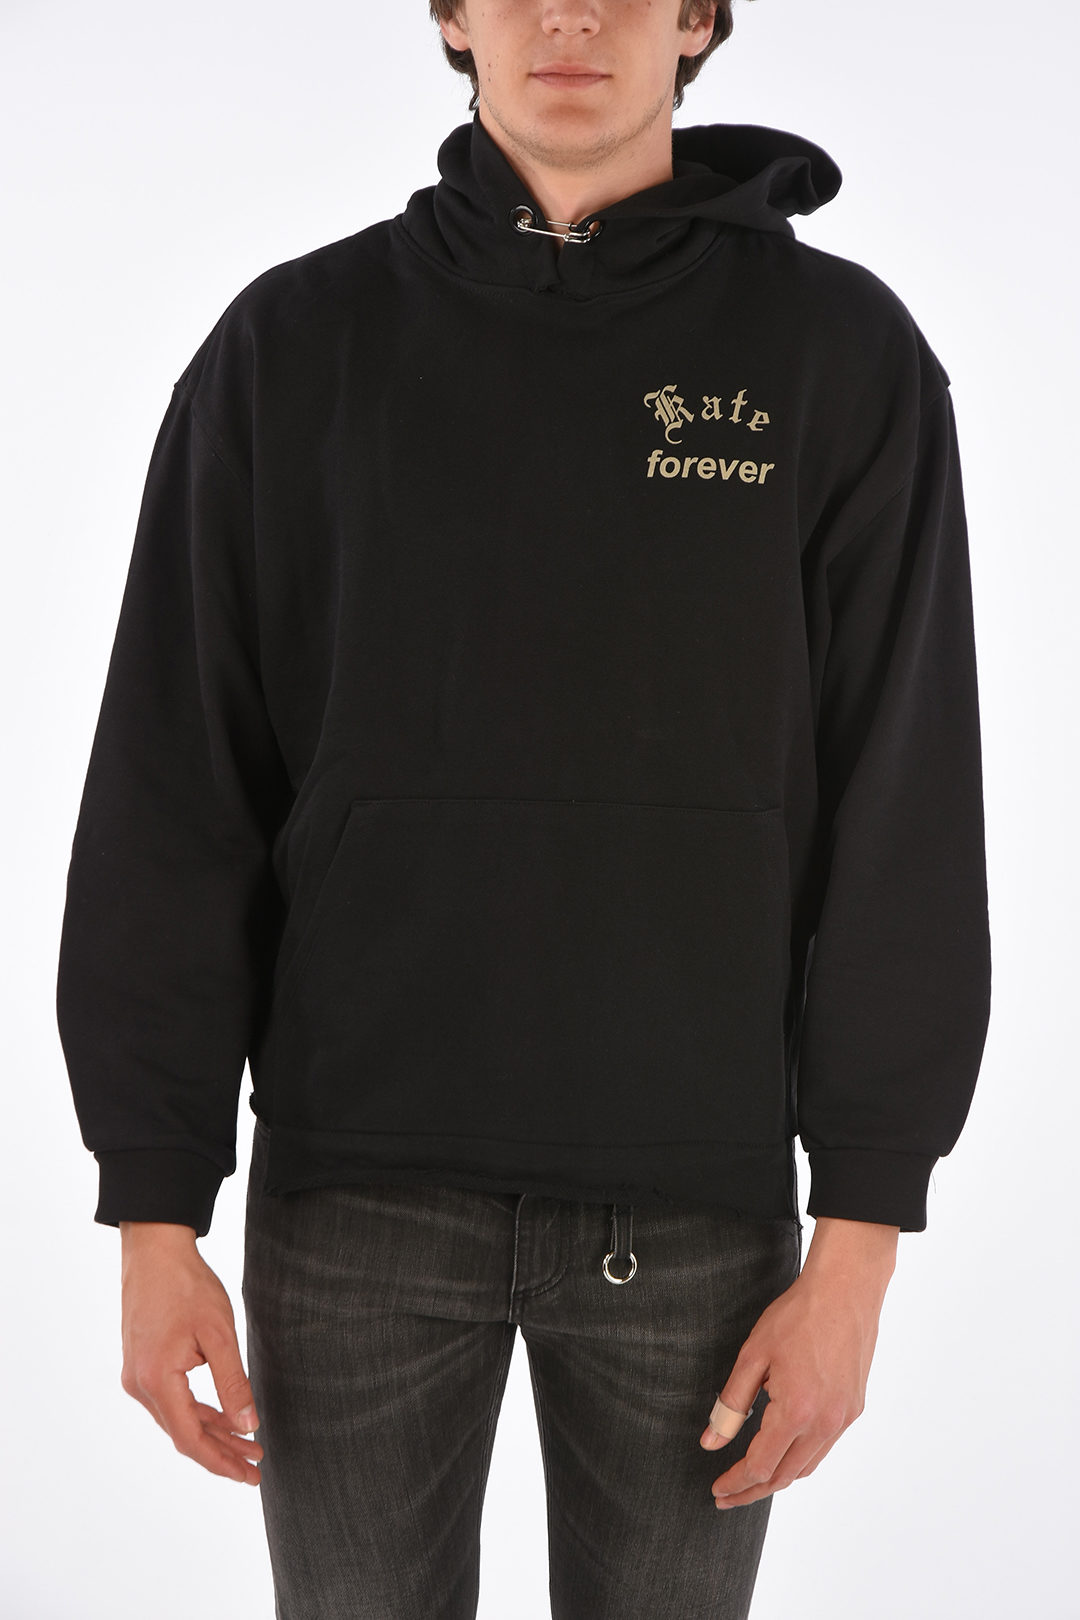 Mr.Completely Kate Forever Hoodie